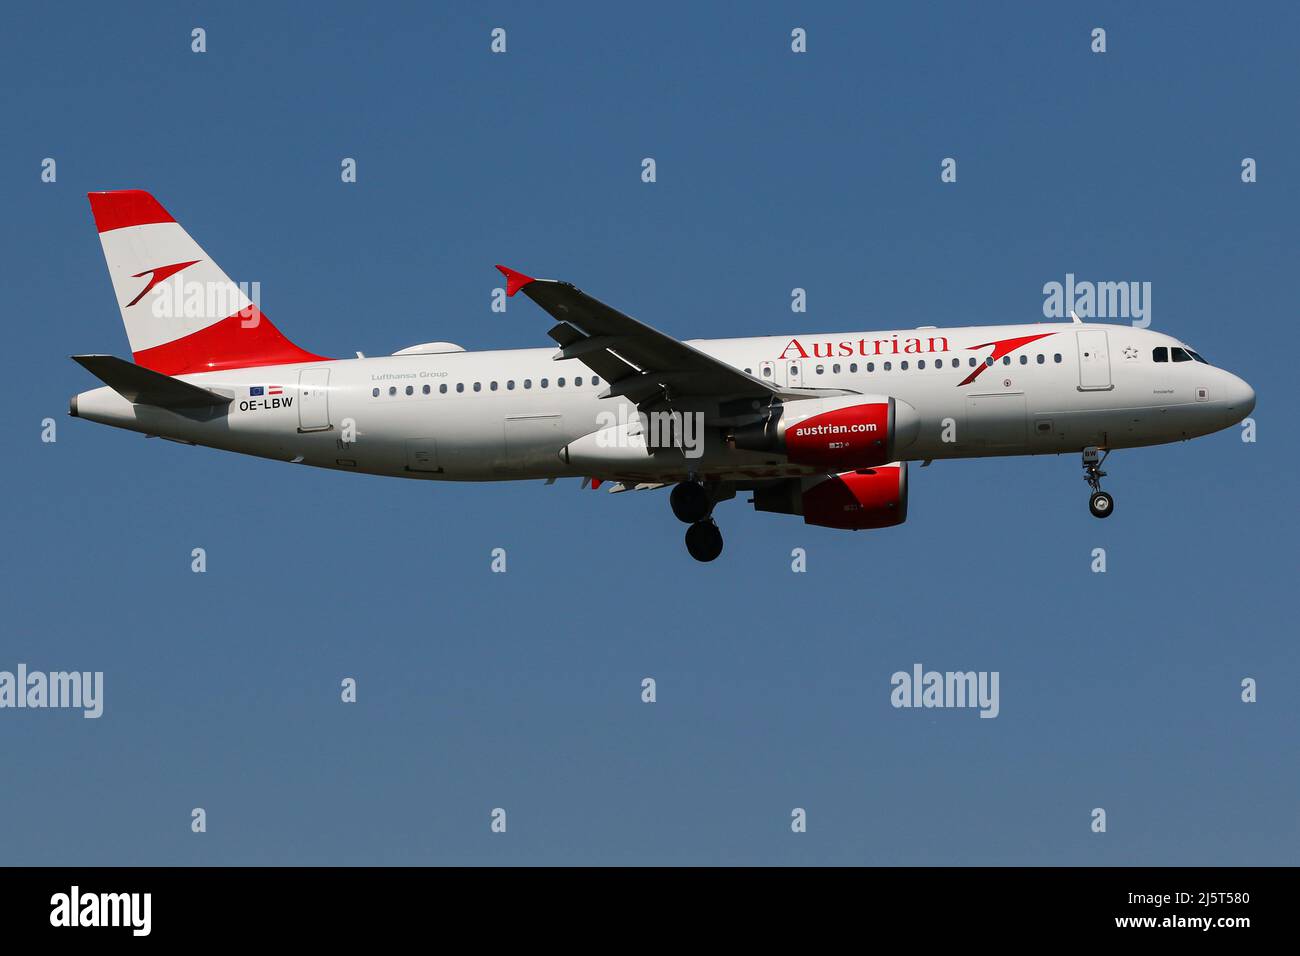 An Airbus A320 operated by Austrian Airlines arrives at London Heathrow Airport Stock Photo